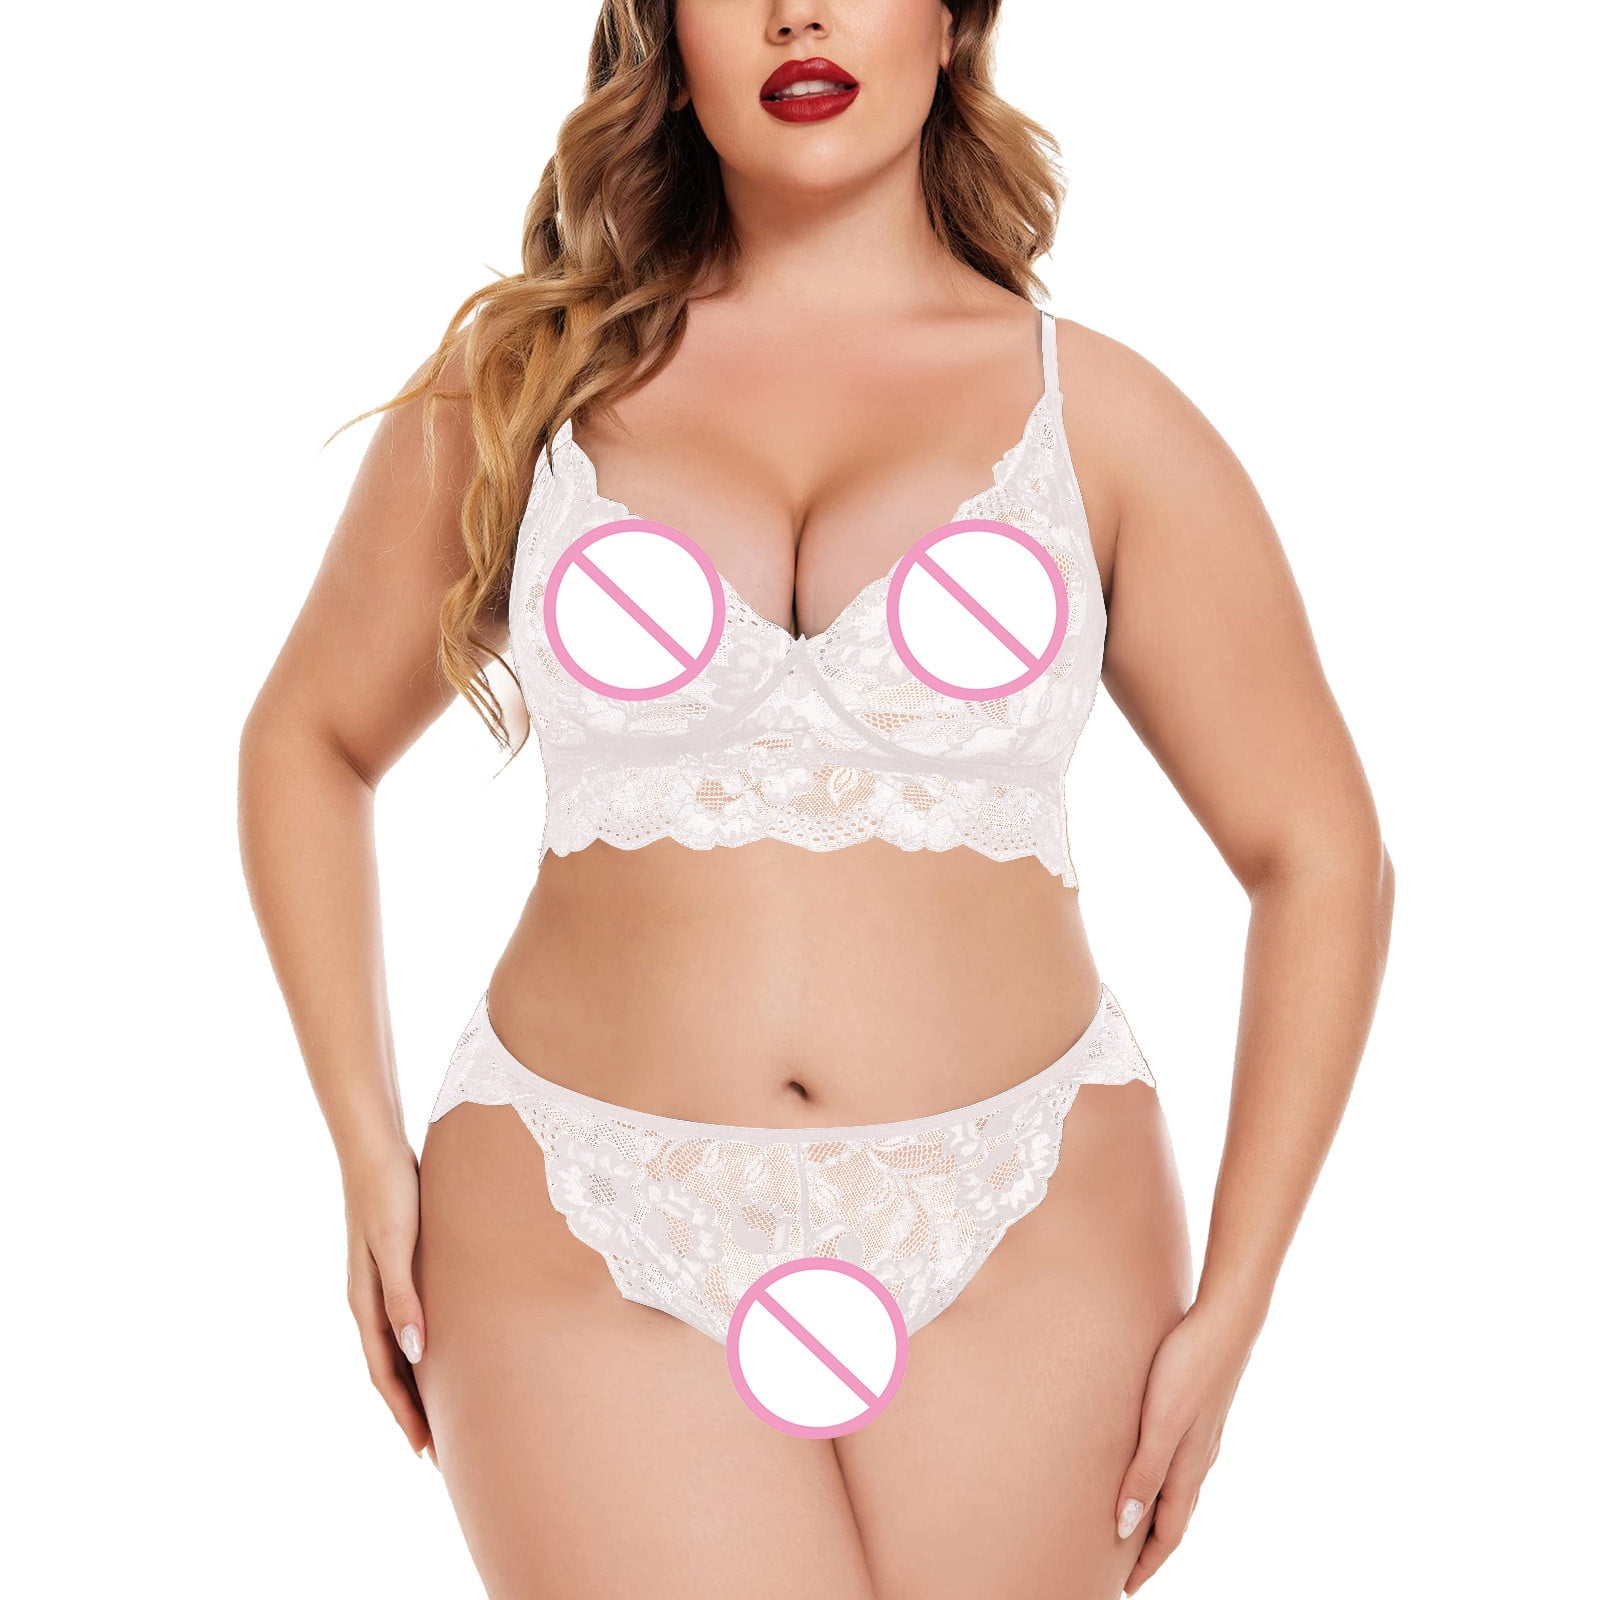 Plus Size Bikini Porn Puck - Lingerie For Women Naughty Plus Size Lingerie Lace Bodysuit Exotic Teddy  Lingerie Strappy Bra And Panty With Choker - Walmart.com